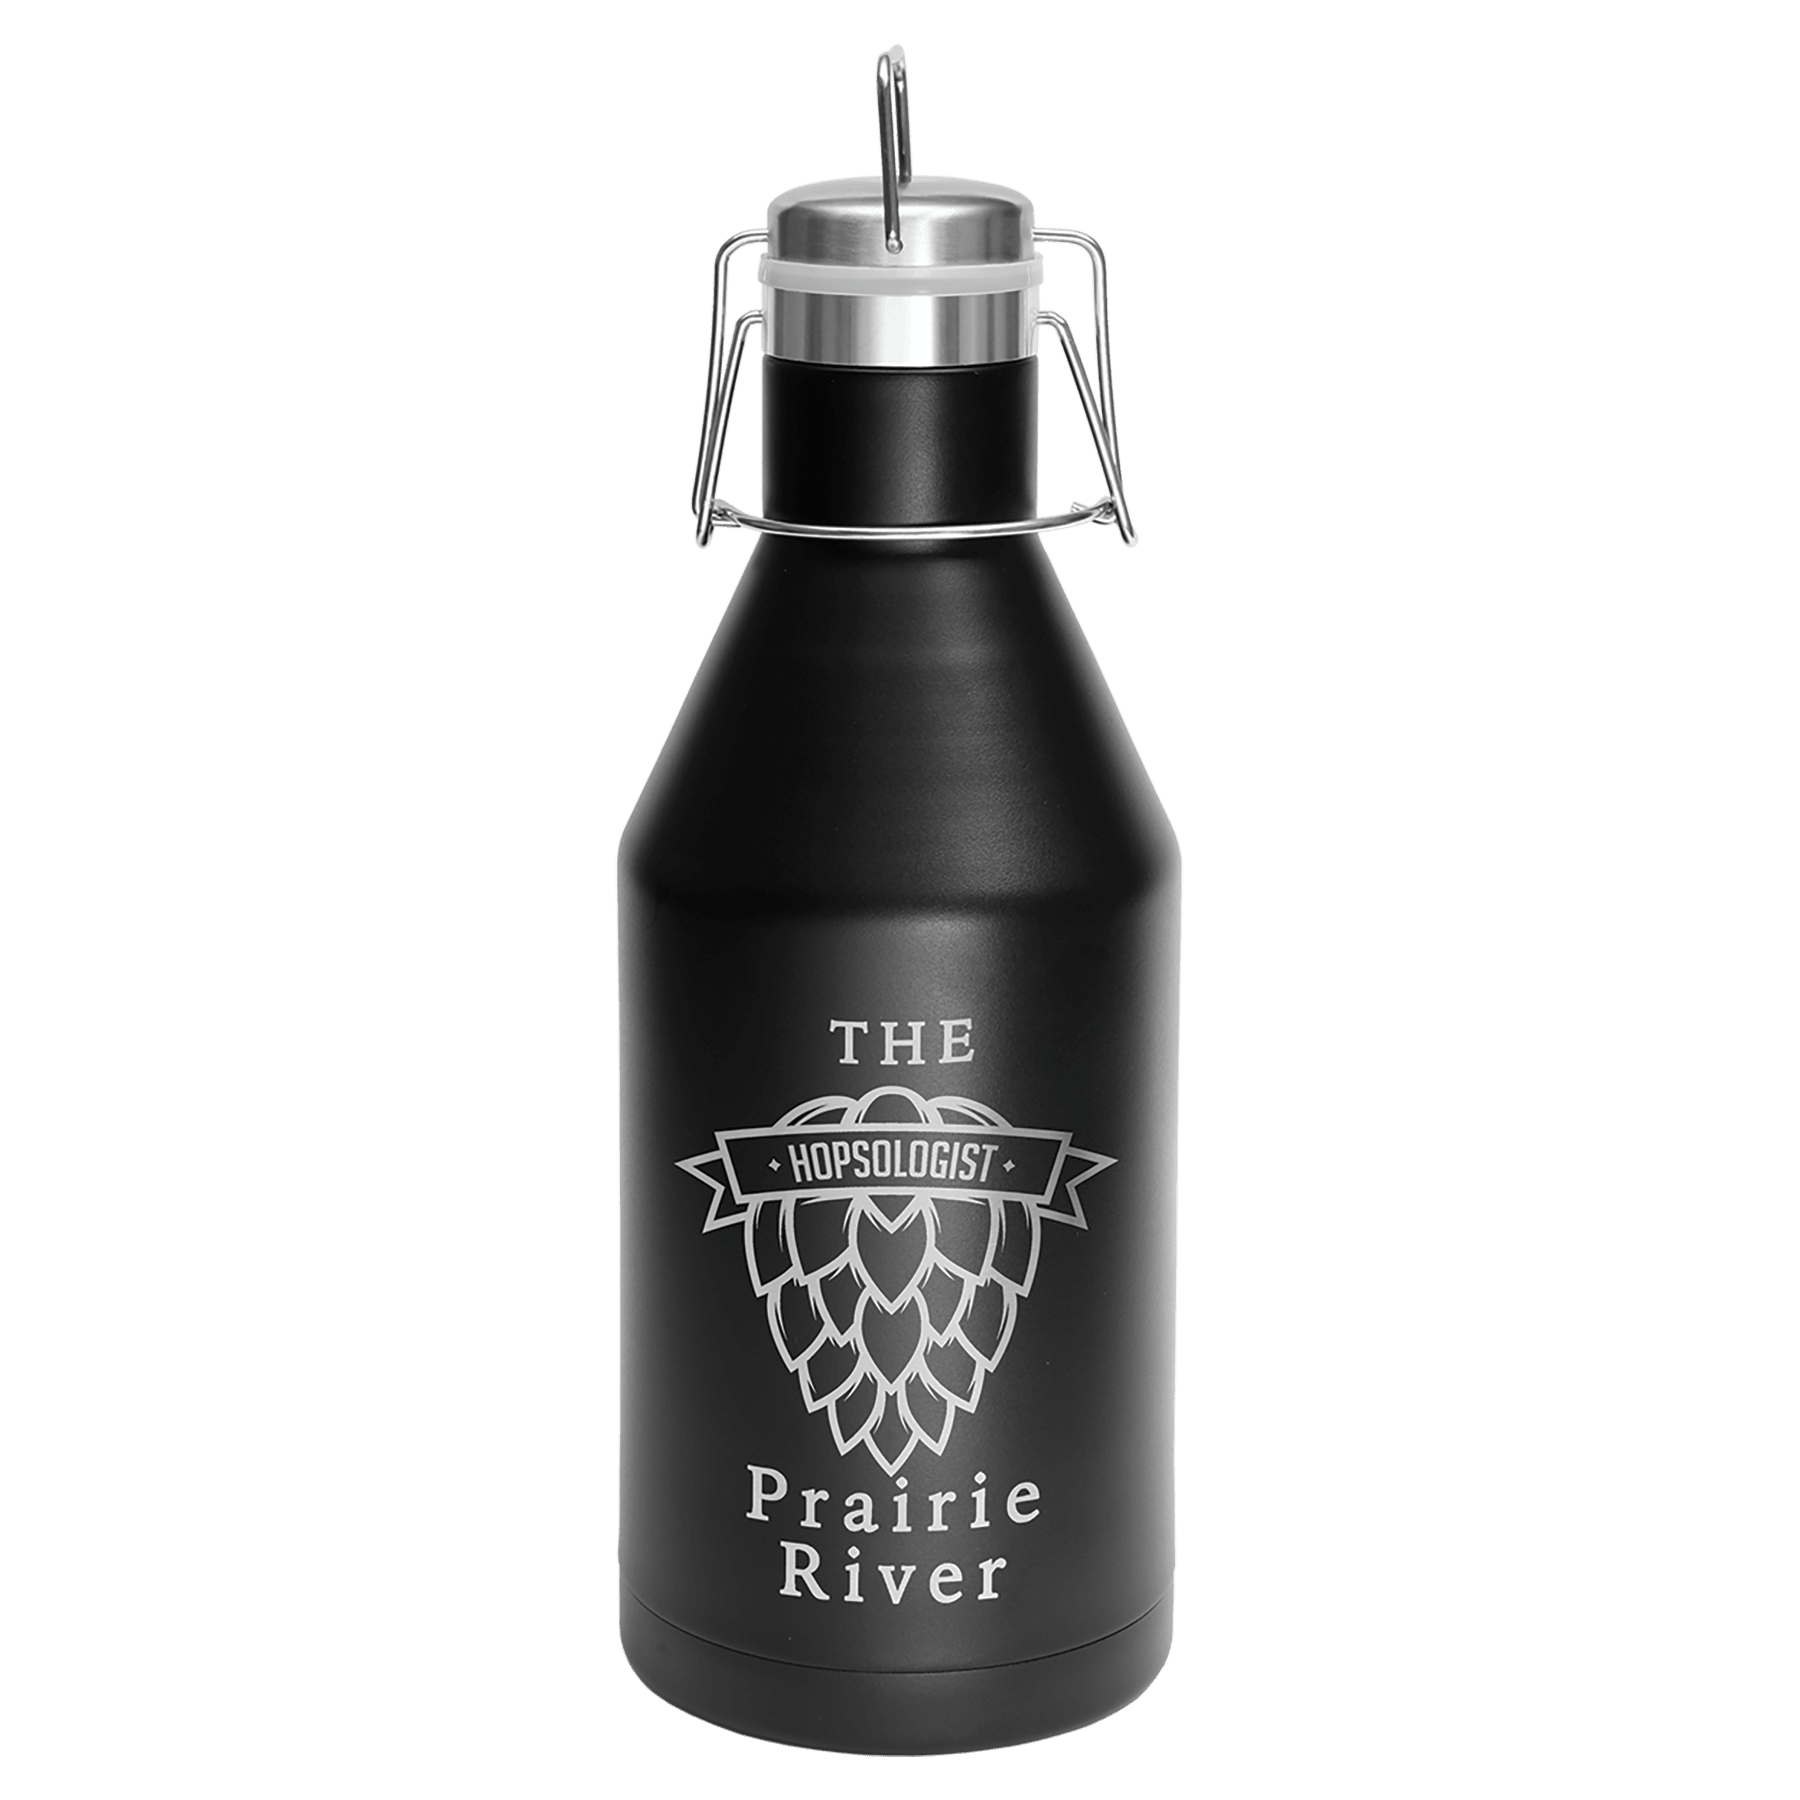 Polar Camel 64 oz. Steel Vacuum Insulated Growler with Swing-Top Lid